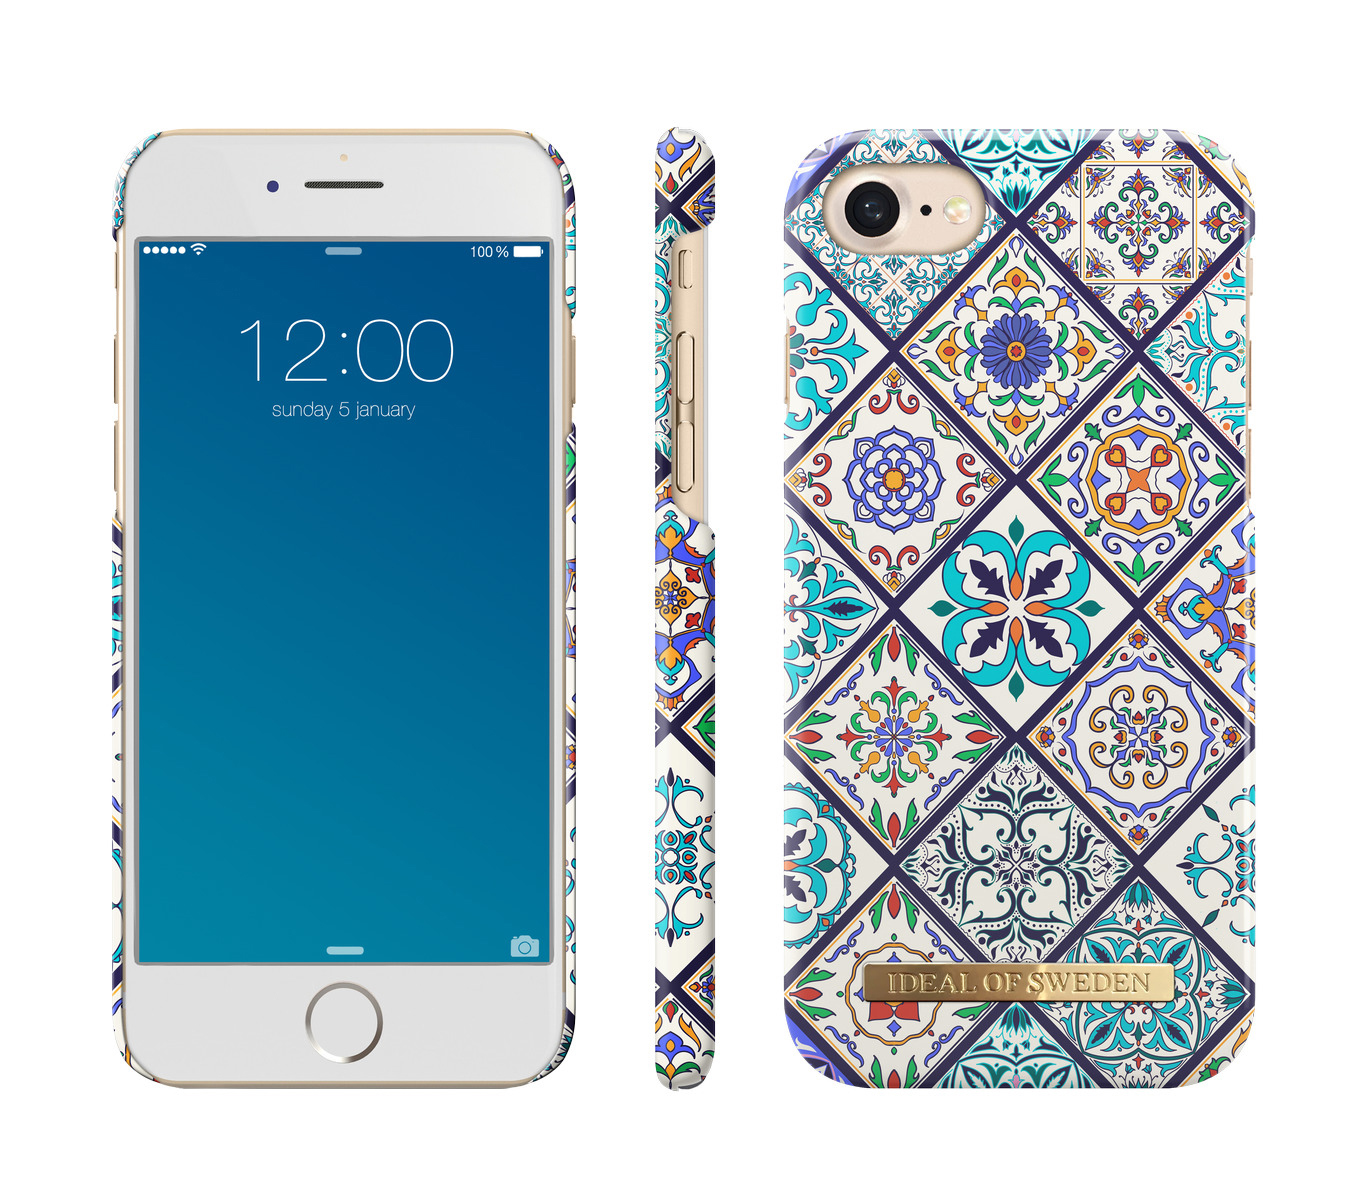 SWEDEN Mosaic 7, 6, iPhone iPhone OF 8, iPhone IDEAL Apple, Fashion, Backcover,